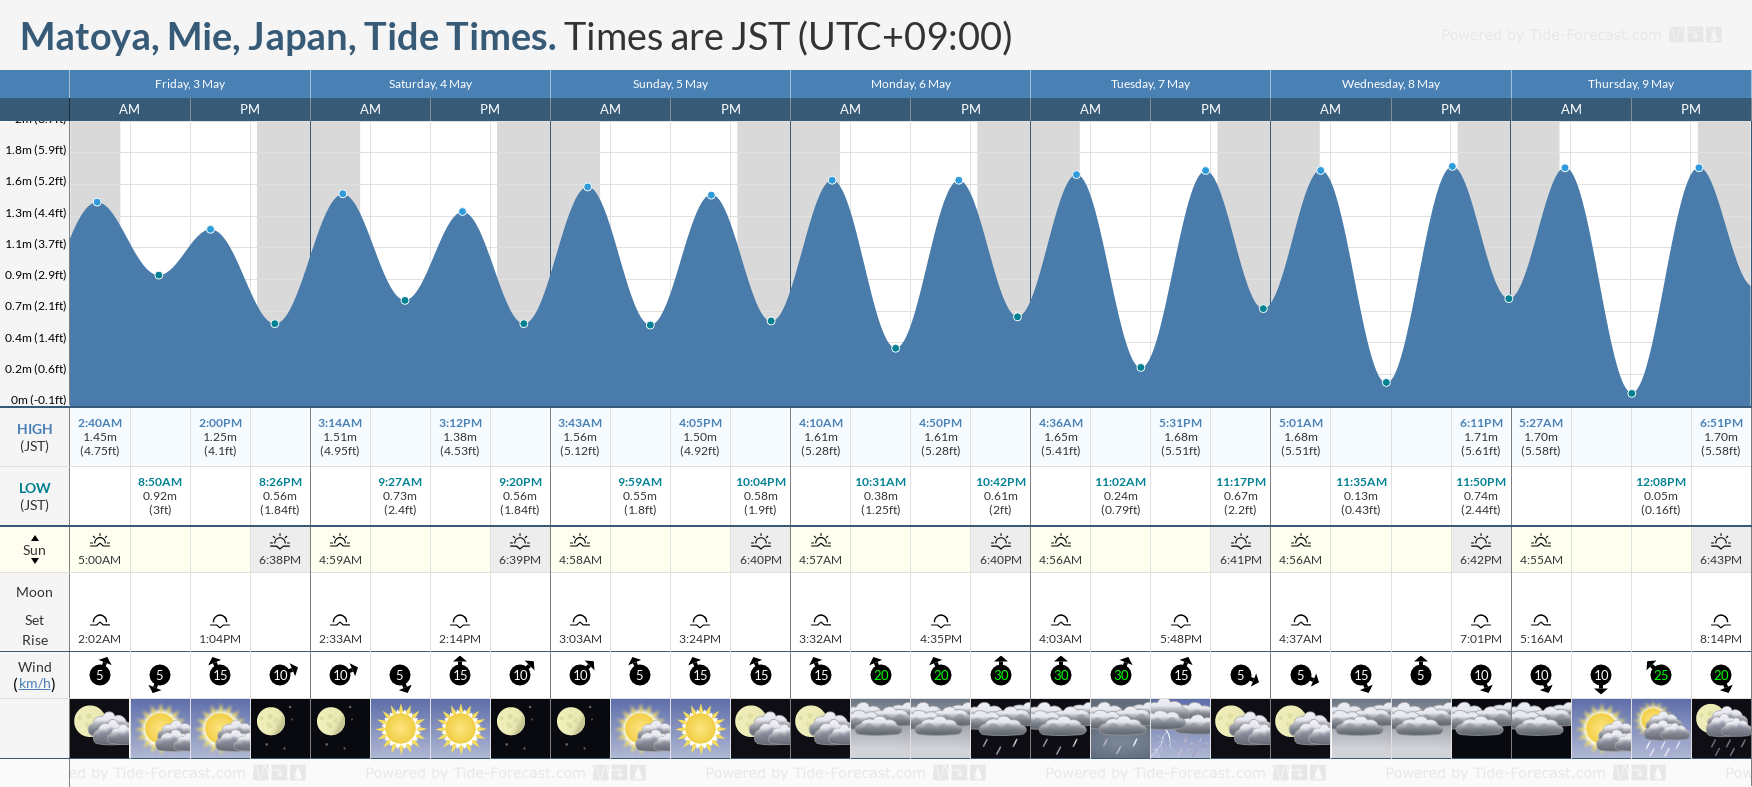 Matoya, Mie, Japan Tide Chart including high and low tide tide times for the next 7 days